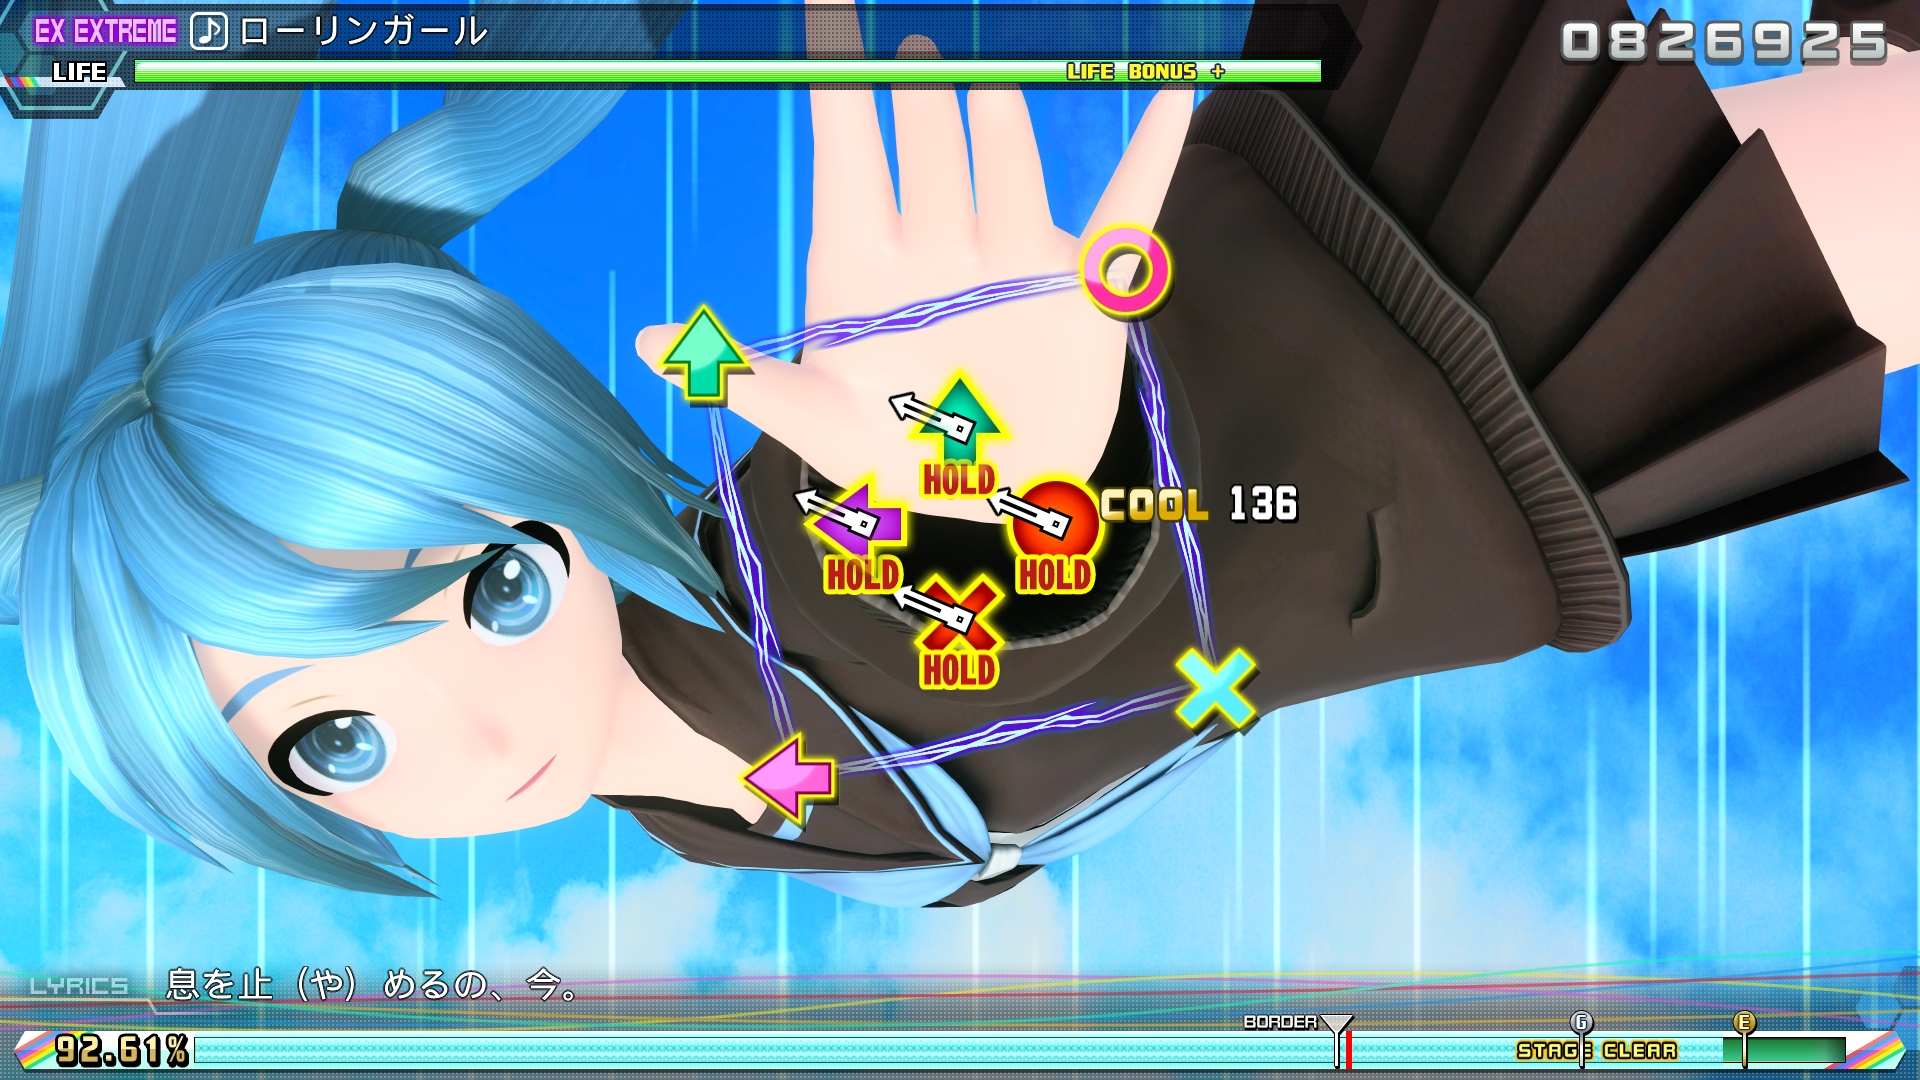 Hatsune Miku: Project DIVA Future Tone version 1.06 update launches April 19, adds Extra Extreme difficulty to 10 songs Gematsu